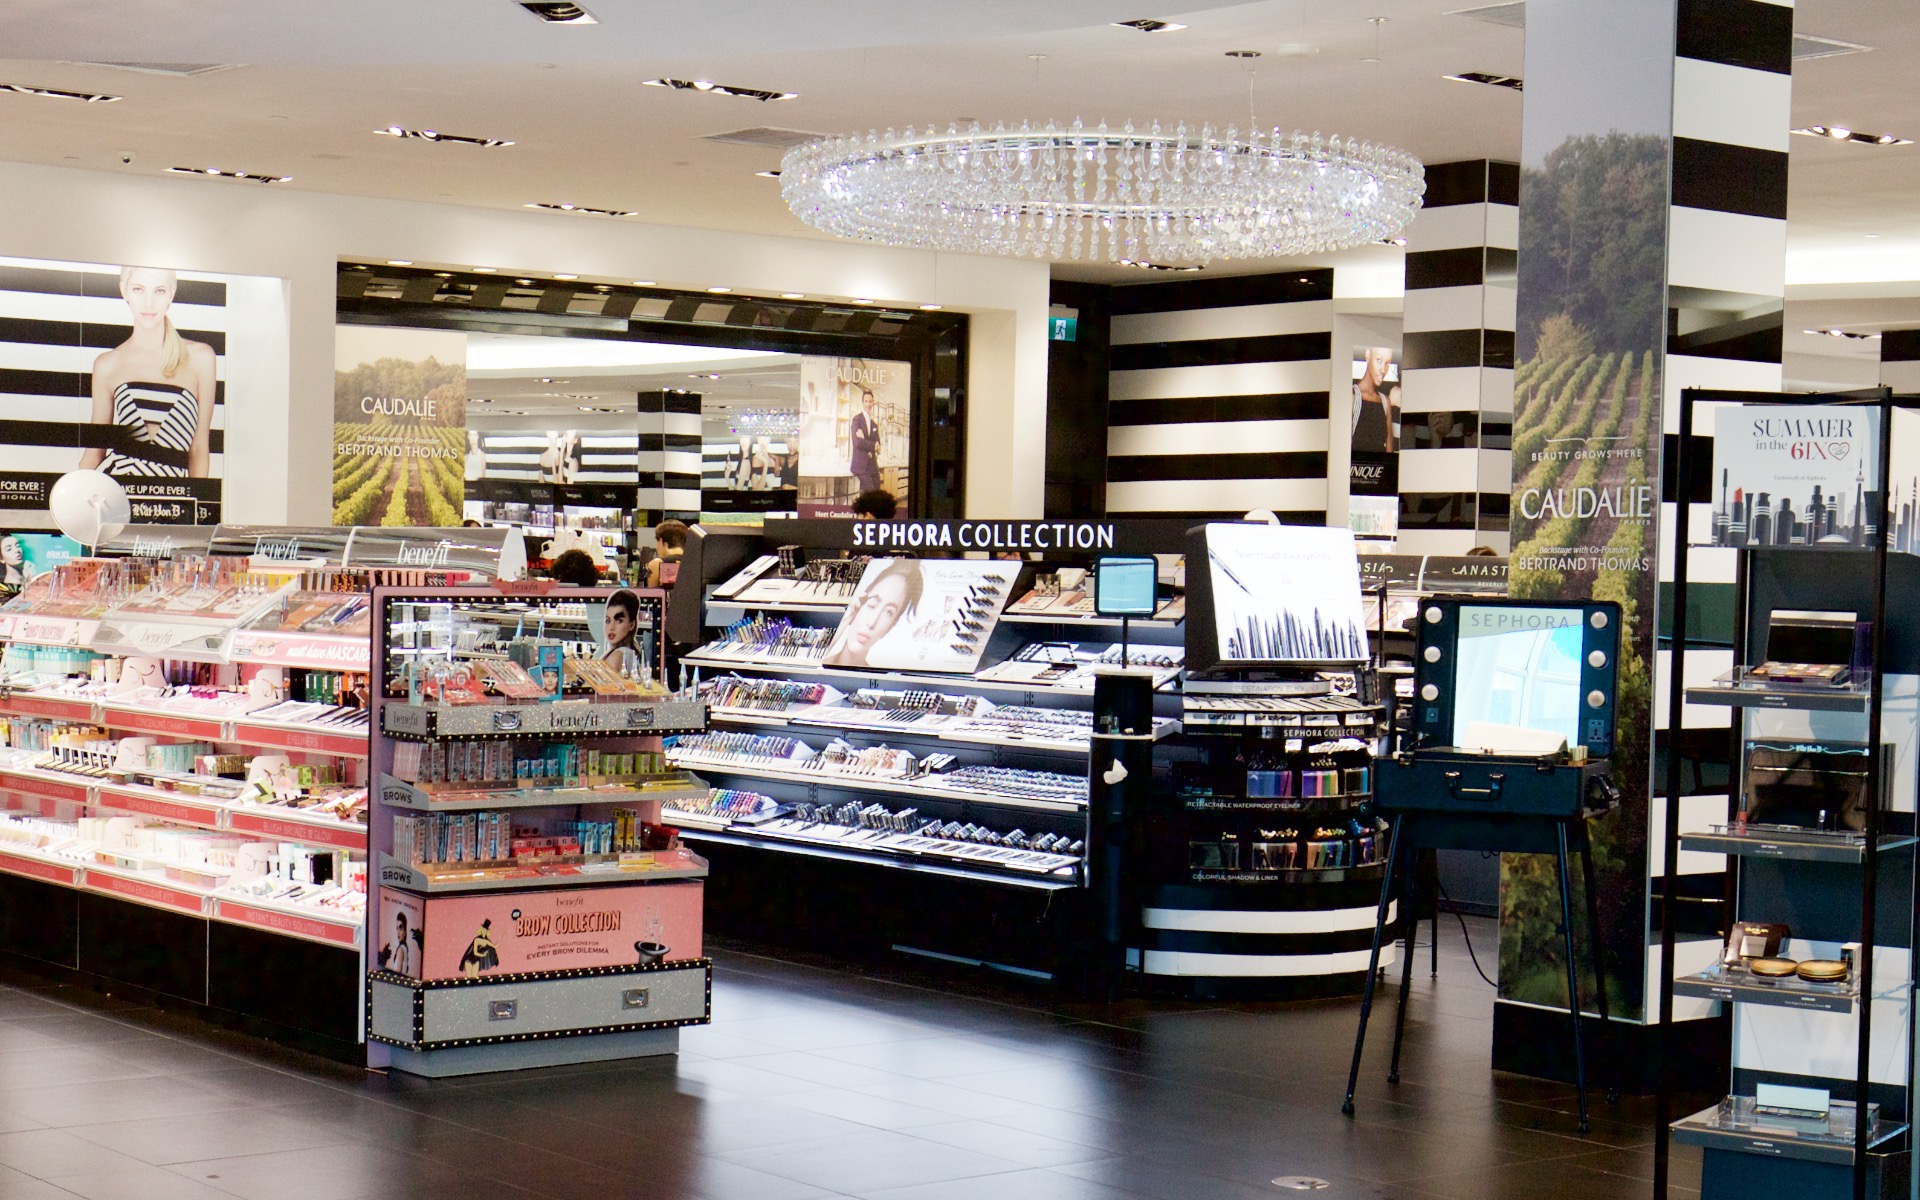 Sephora: how to save on purchases and receive gifts | The High ...